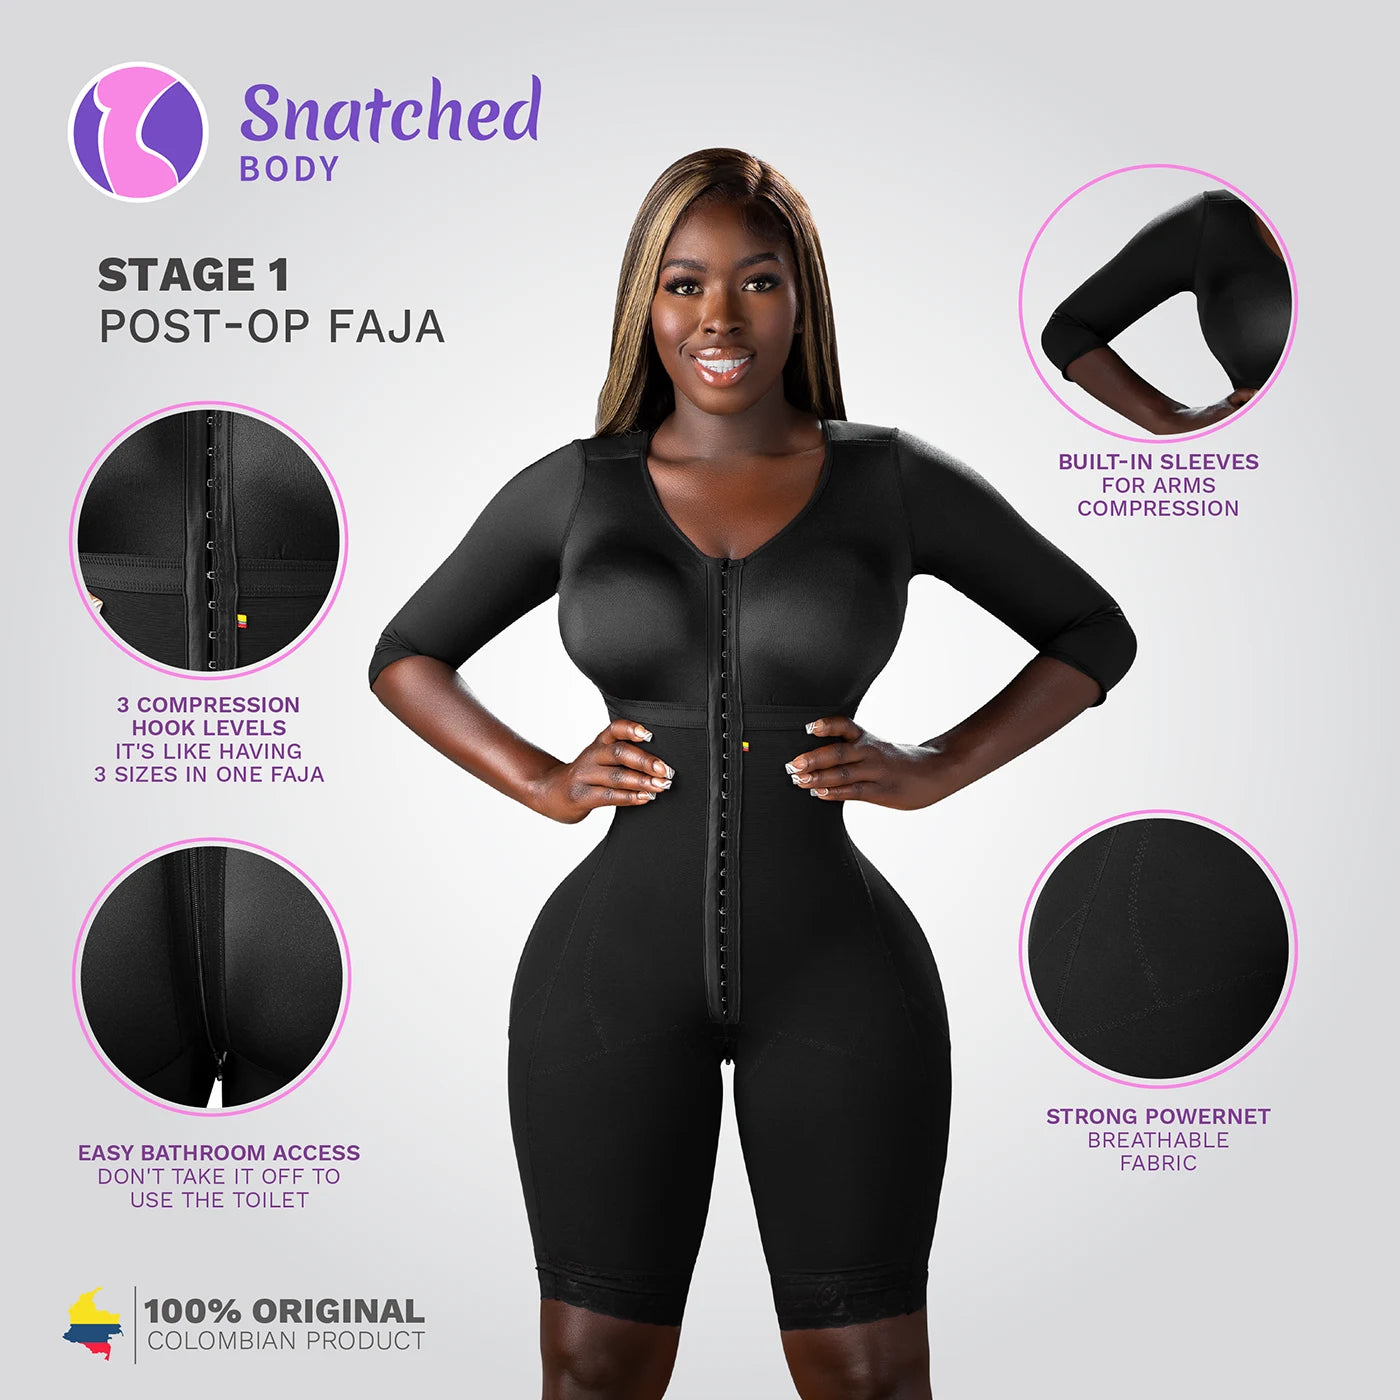 Fajas: Stage 1 or Stage 2, Learn the Difference! - Snatched body